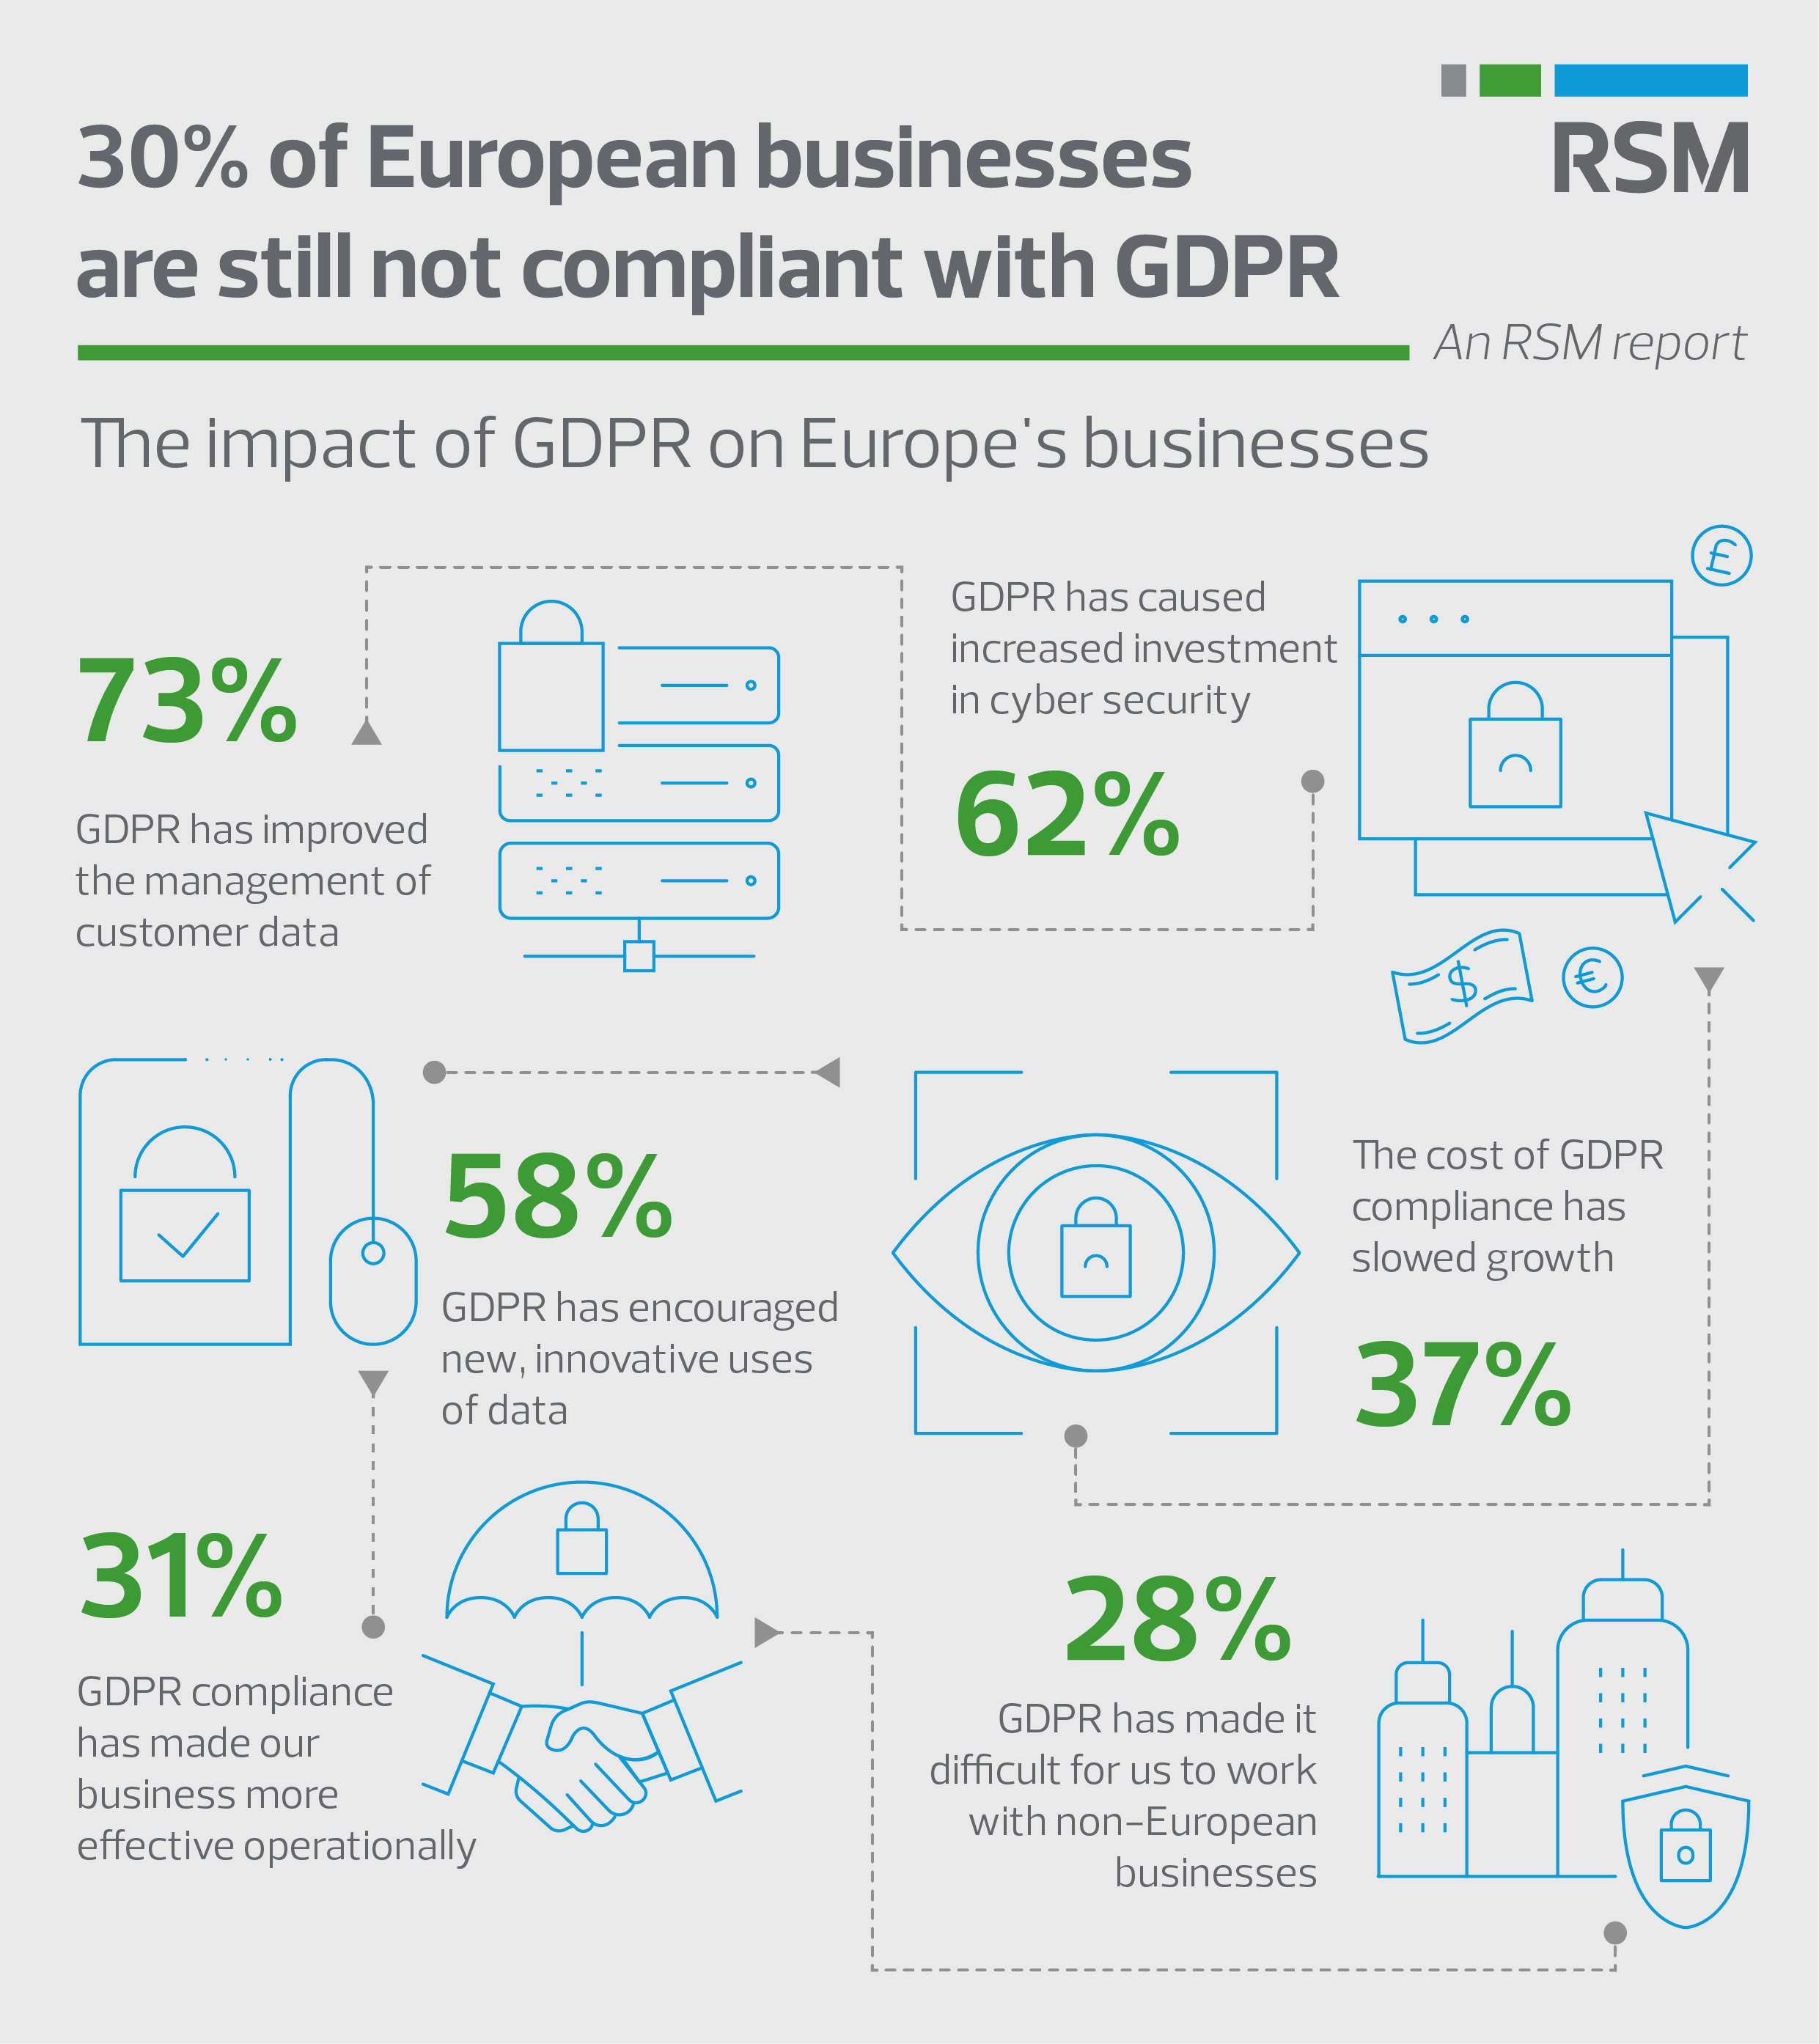 the_impact_of_gdpr_on_europes_businesses_infographic.png